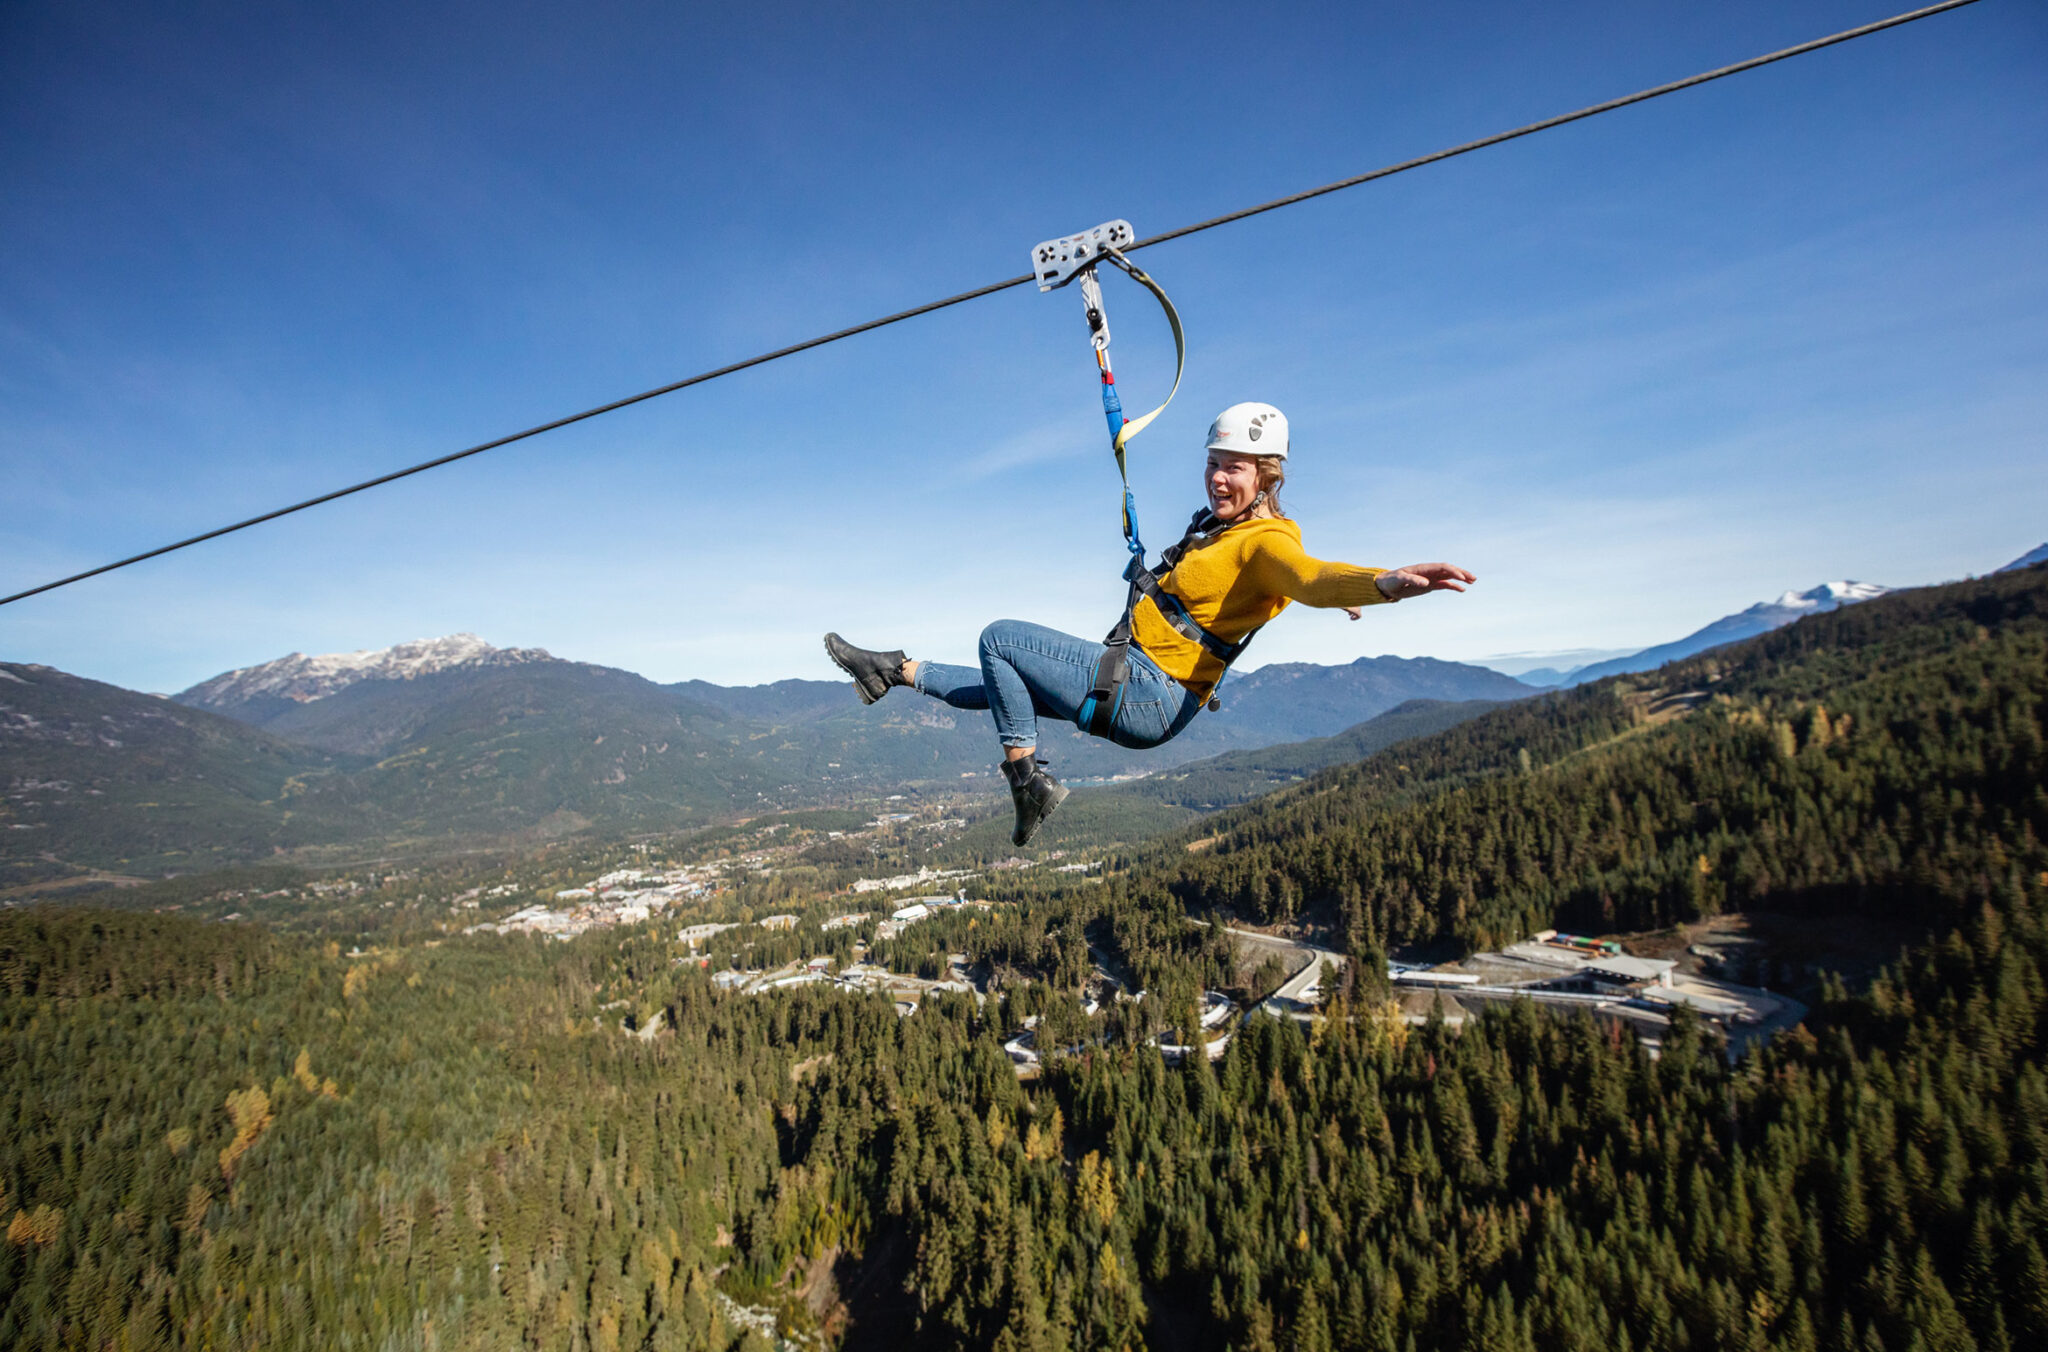 A person ziplines across the valley in between Whistler and Blackcomb mountains, the longest zipline in NA. Arms out, big smile, summer sun, it looks thrilling.